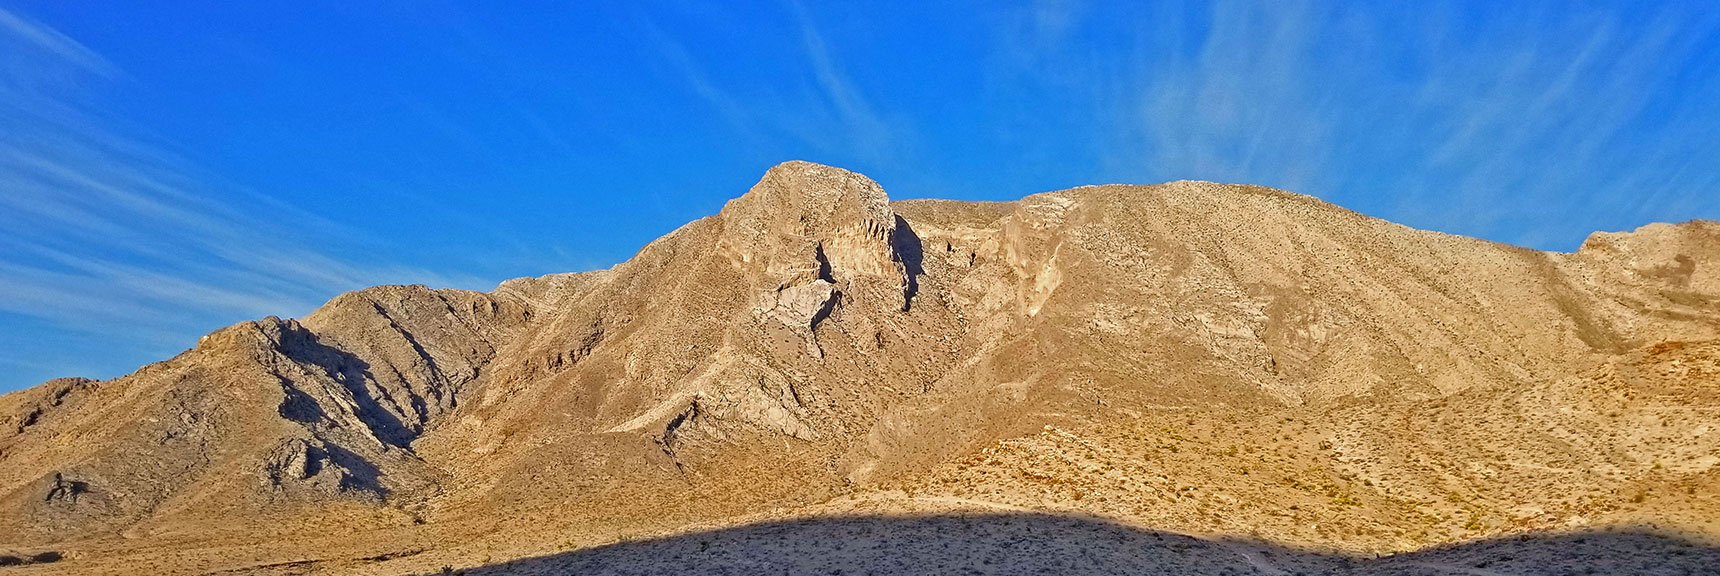 Most Likely Summit Approaches Are to the Right (North) of Summit Area | Cheyenne Mountain | Las Vegas, Nevada